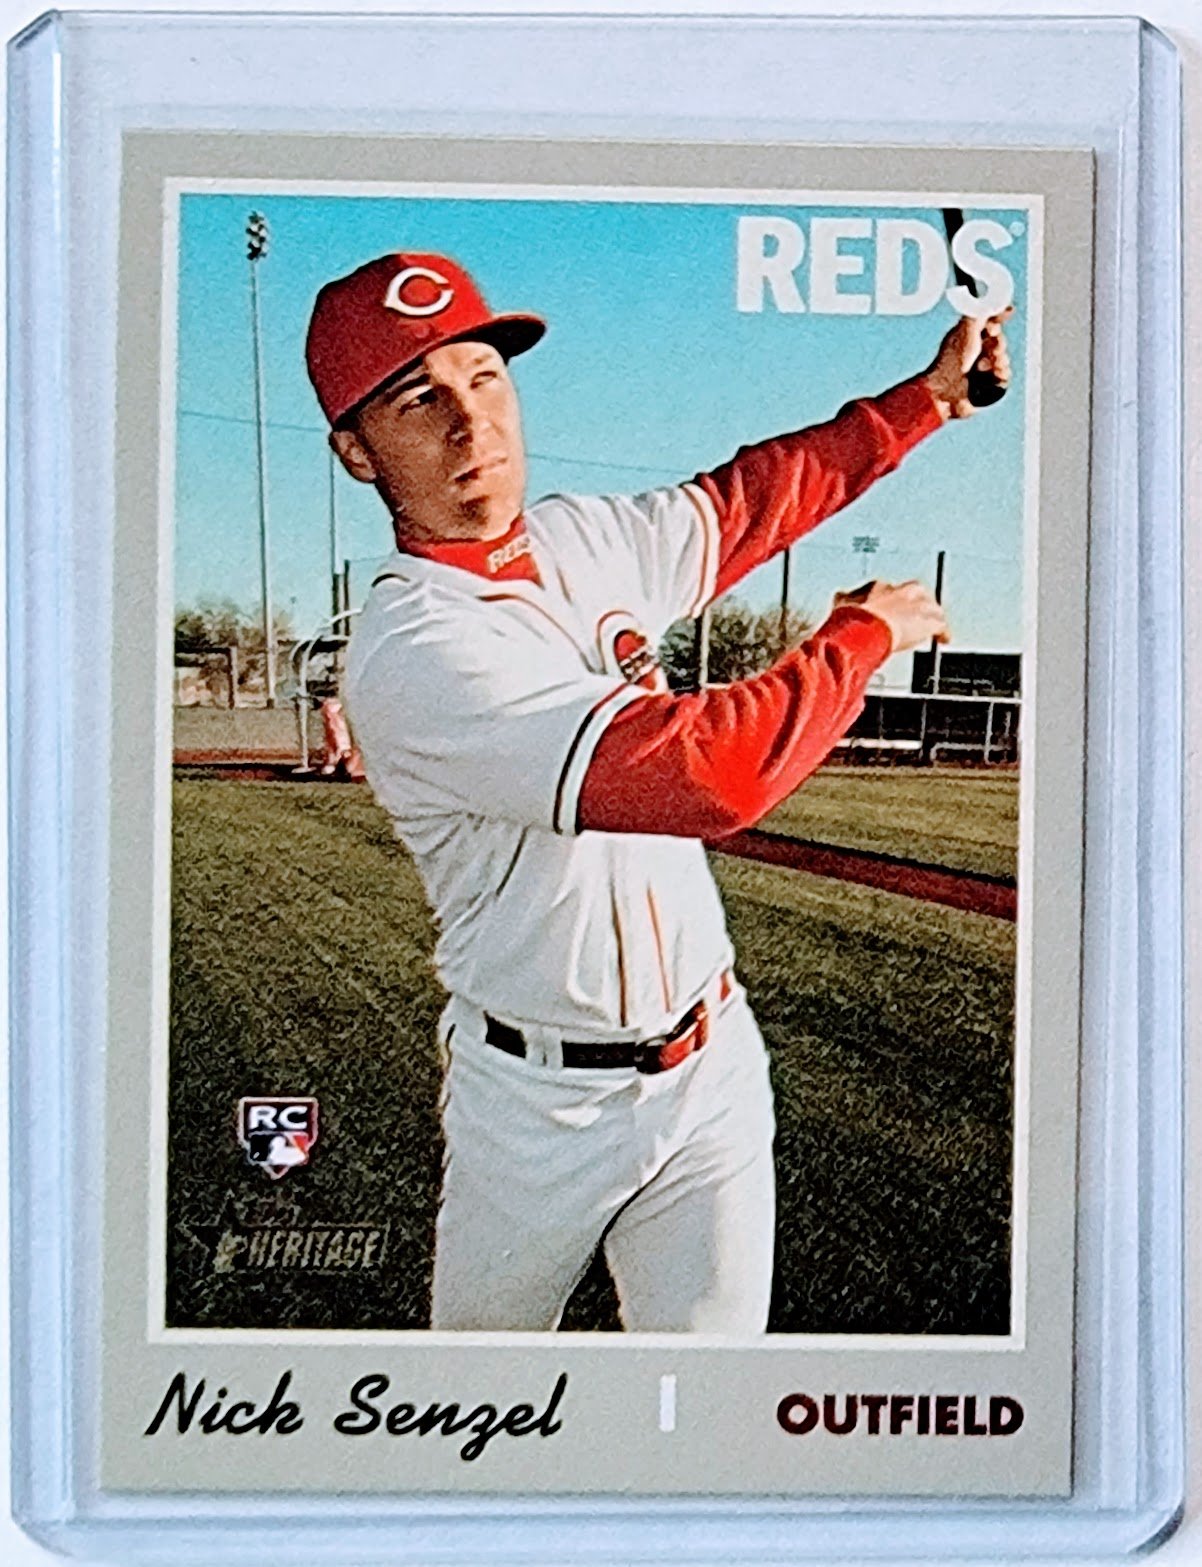 2019 Topps Heritage Nick Senzel Rookie Baseball Trading Card TPTV simple Xclusive Collectibles   